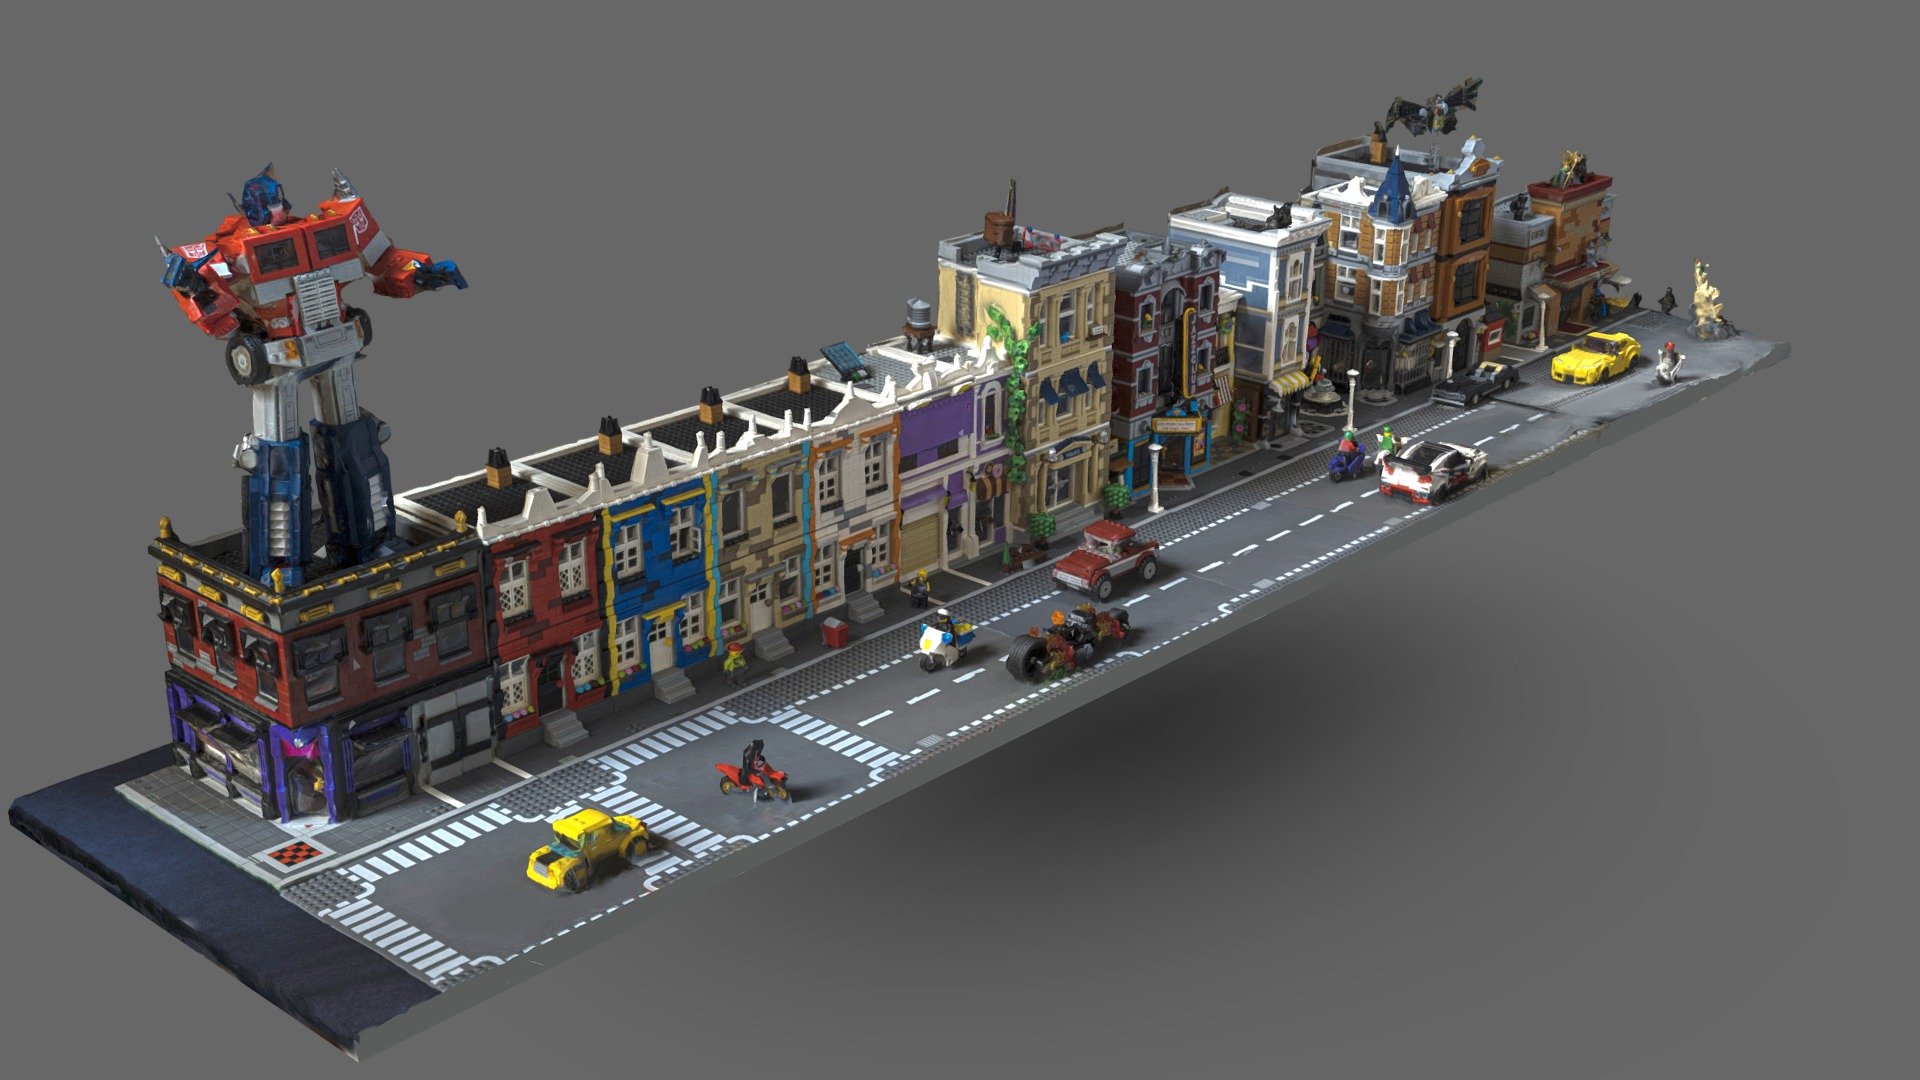 A fast -on the way- smartphone photogrammetry scan of part of a Lego Avenue created by AsturBrick ( https://twitter.com/asturbrick ), 
the best Lego Asociation of the north of Spain.

Processed with Capturing Reality 3d model